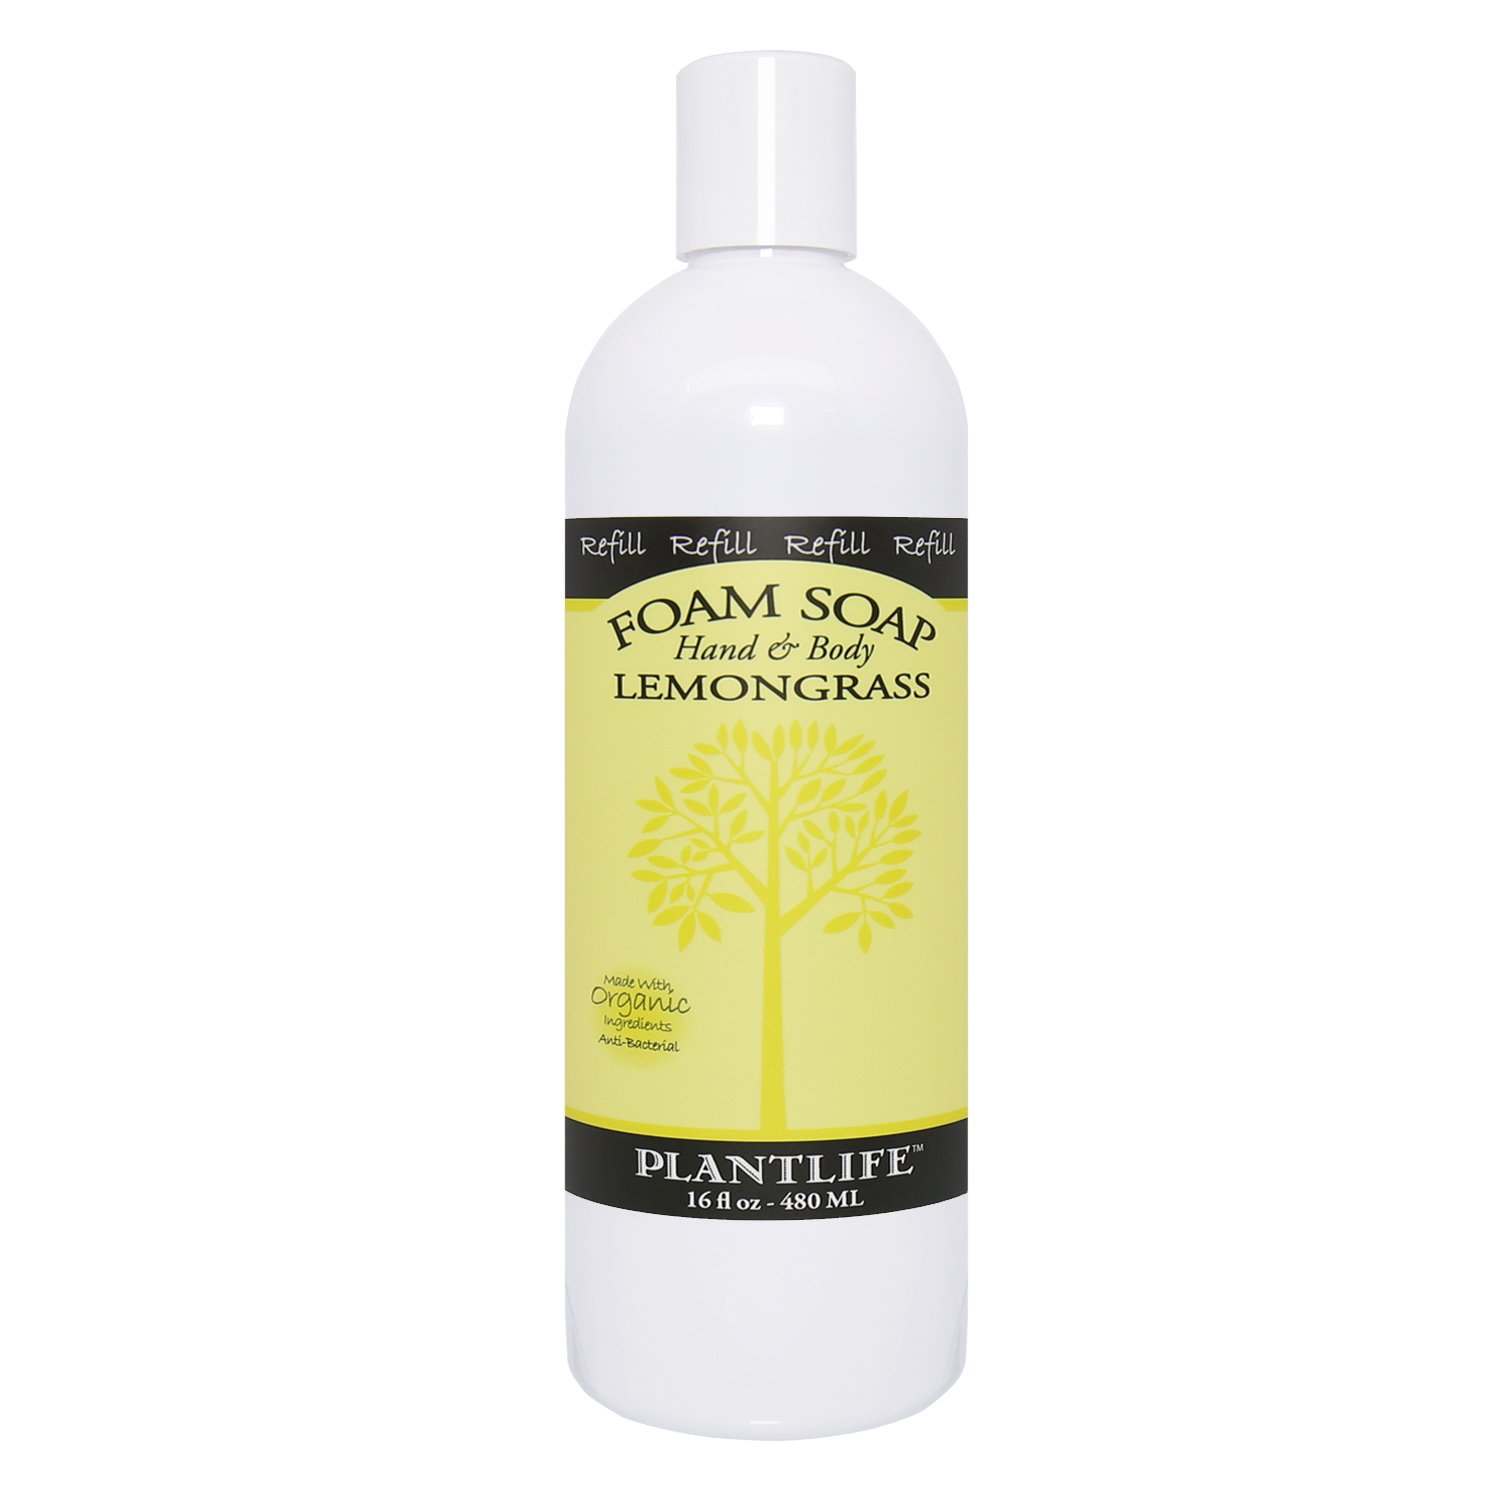 Plantlife Lemongrass Foam Soap Refill - Gentle, Moisturizing, Plant-based Foam Soap for All Skin Types - Ideal for use as a Hand & Body wash, Shaving Cream, and Foaming Fun for Kids - Made in California 16 oz